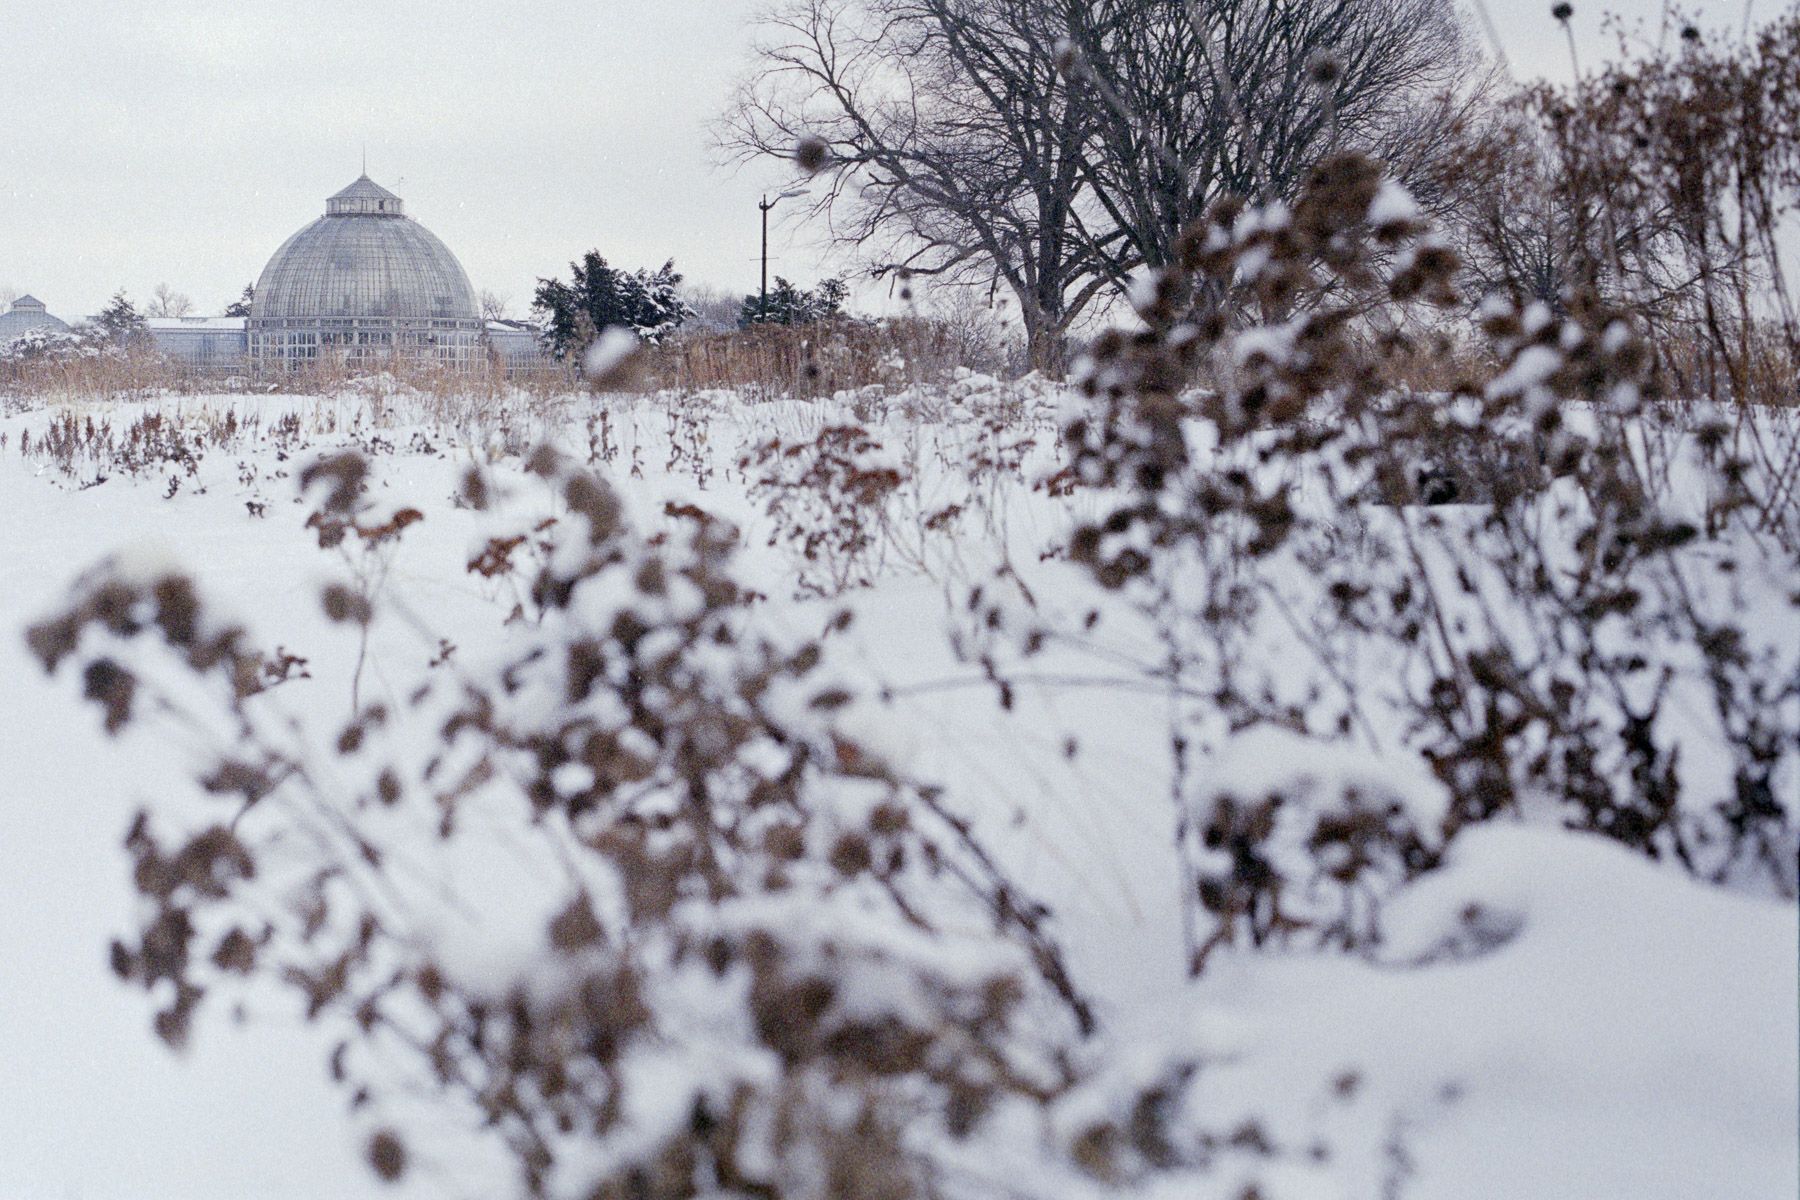 Glimpsing snow-covered conservatory through wintered wildflowers.